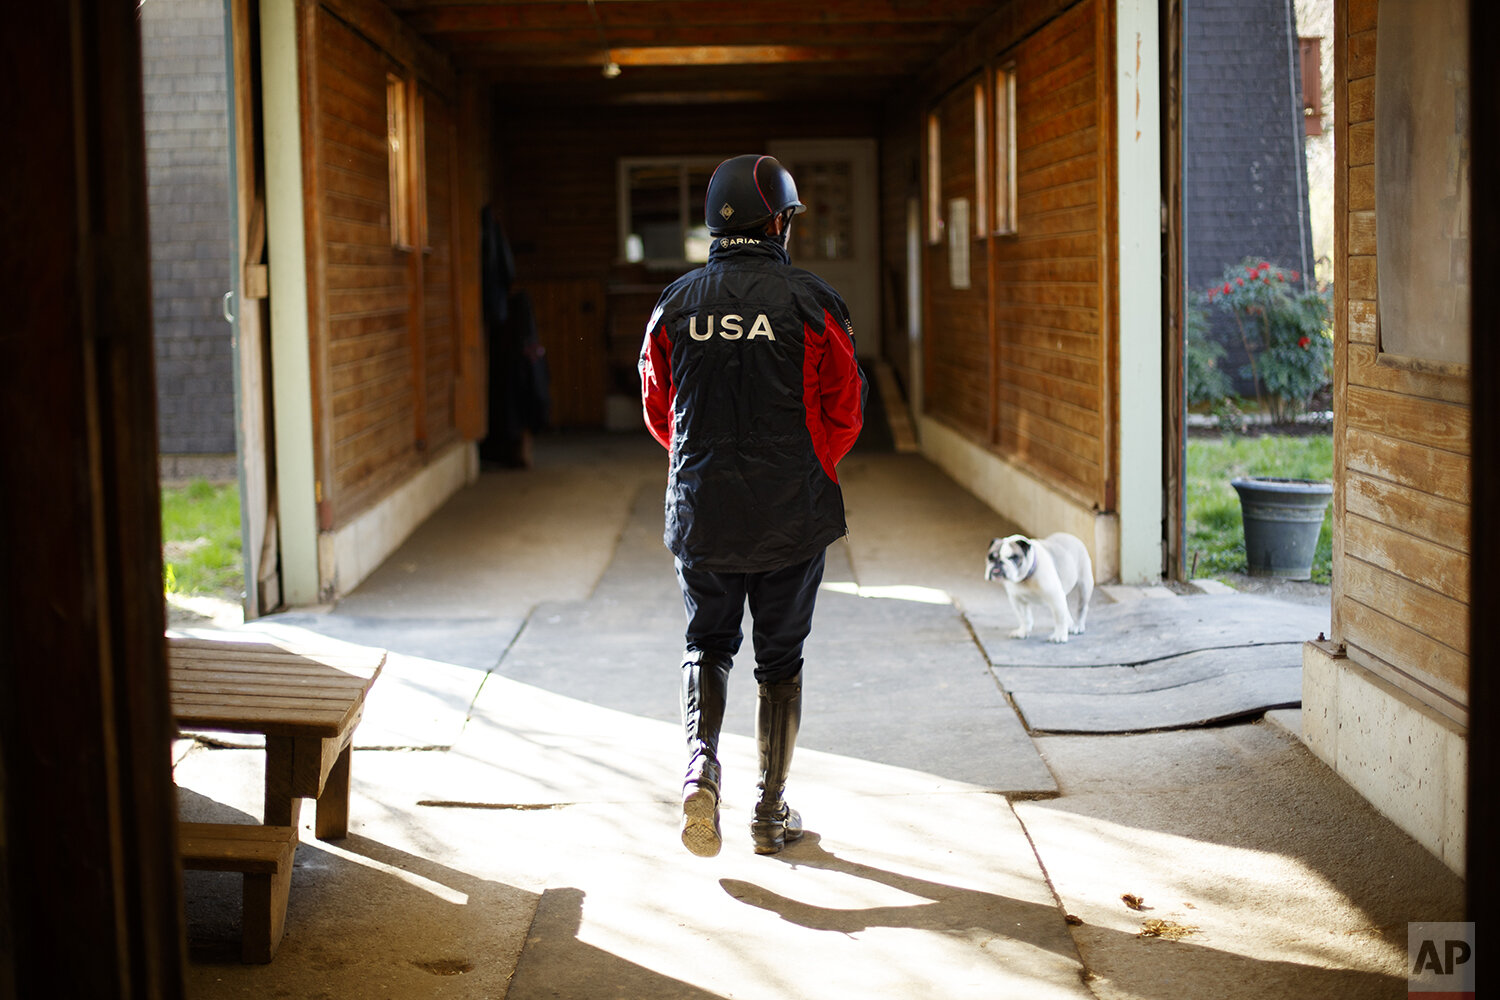  Phillip Dutton, a medal-winning equestrian on the U.S. Olympic team, walks through the barn at his farm before a training session, Thursday, April 2, 2020, in West Grove, Pa. (AP Photo/Matt Slocum) 